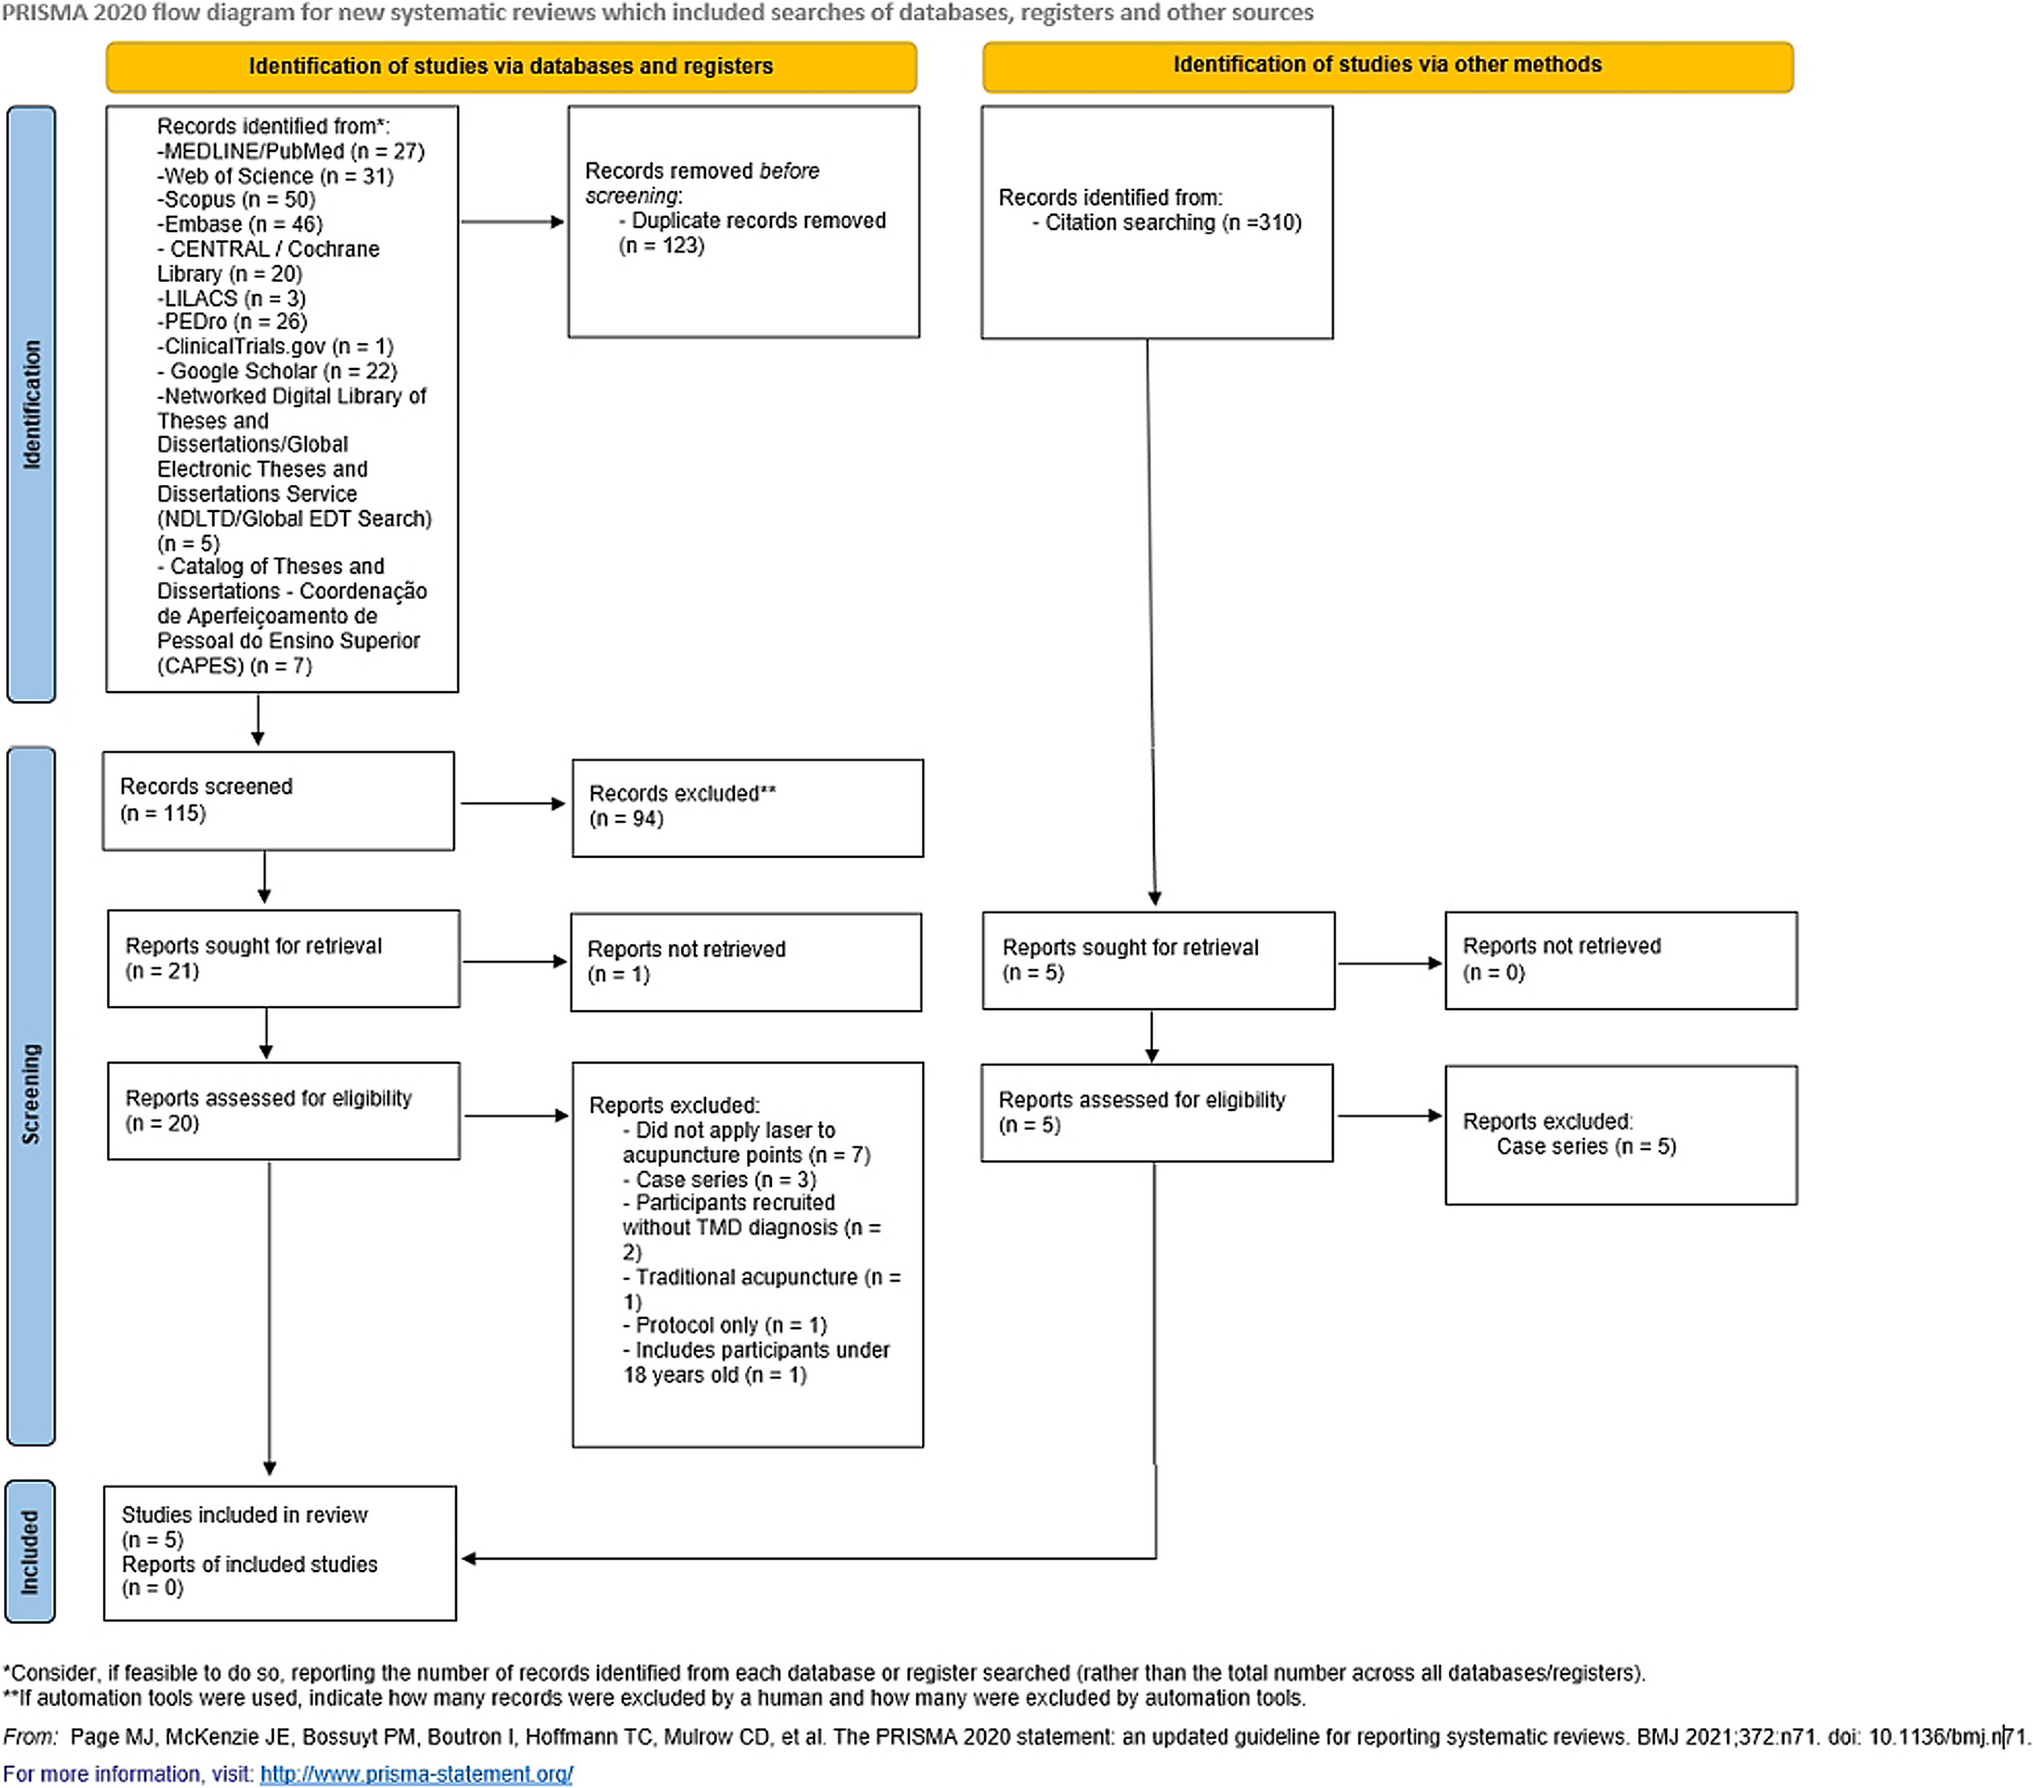 Effectiveness of Laser Acupuncture for Reducing Pain and Increasing Mouth Opening Range in Individuals with Temporomandibular Disorder: A Systematic Review and Network Meta-Analysis